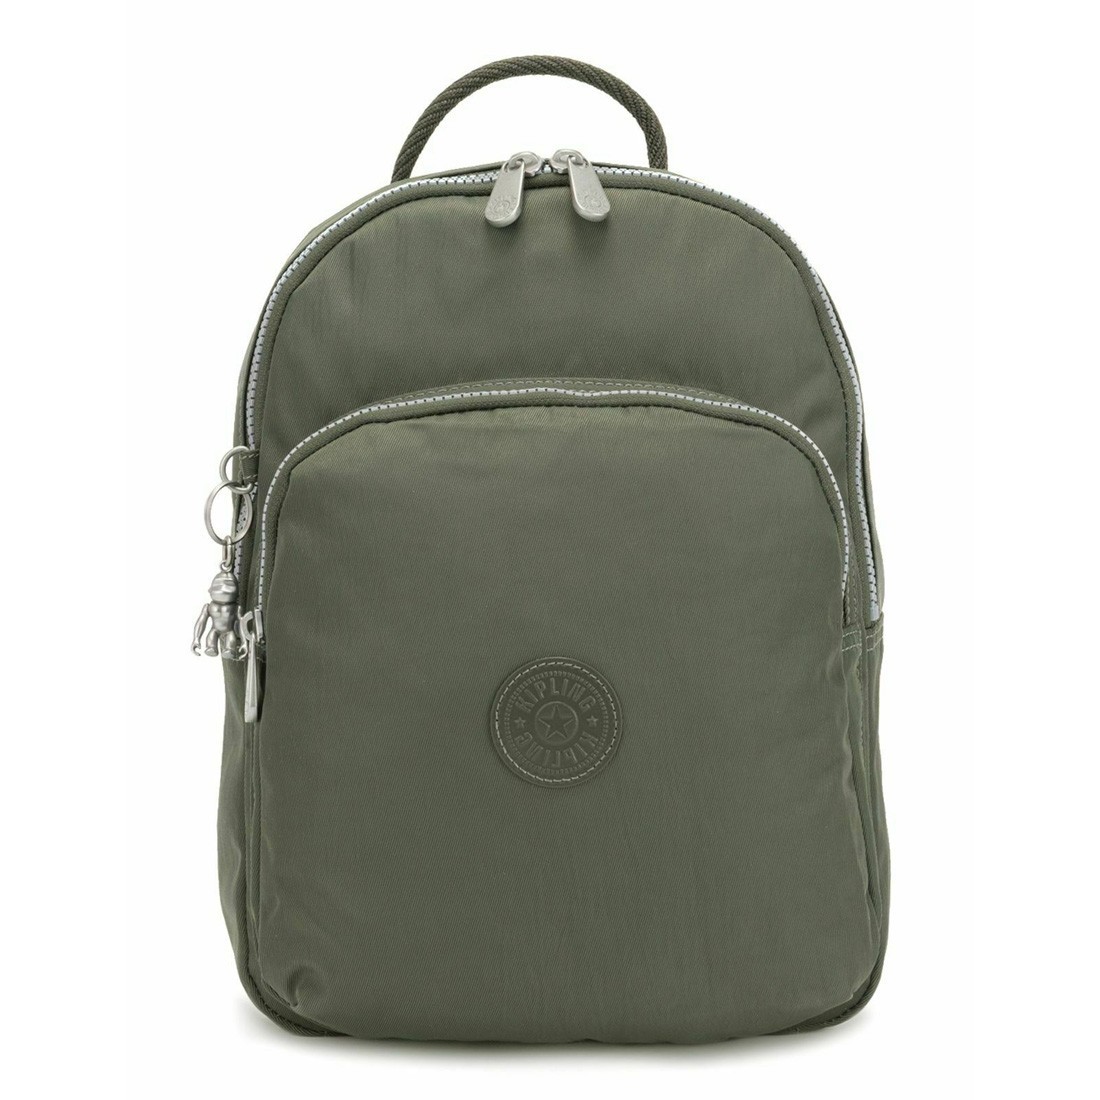 Buy Kipling SEOUL AIR S - Rich Green - Kipling, delivered to your home ...